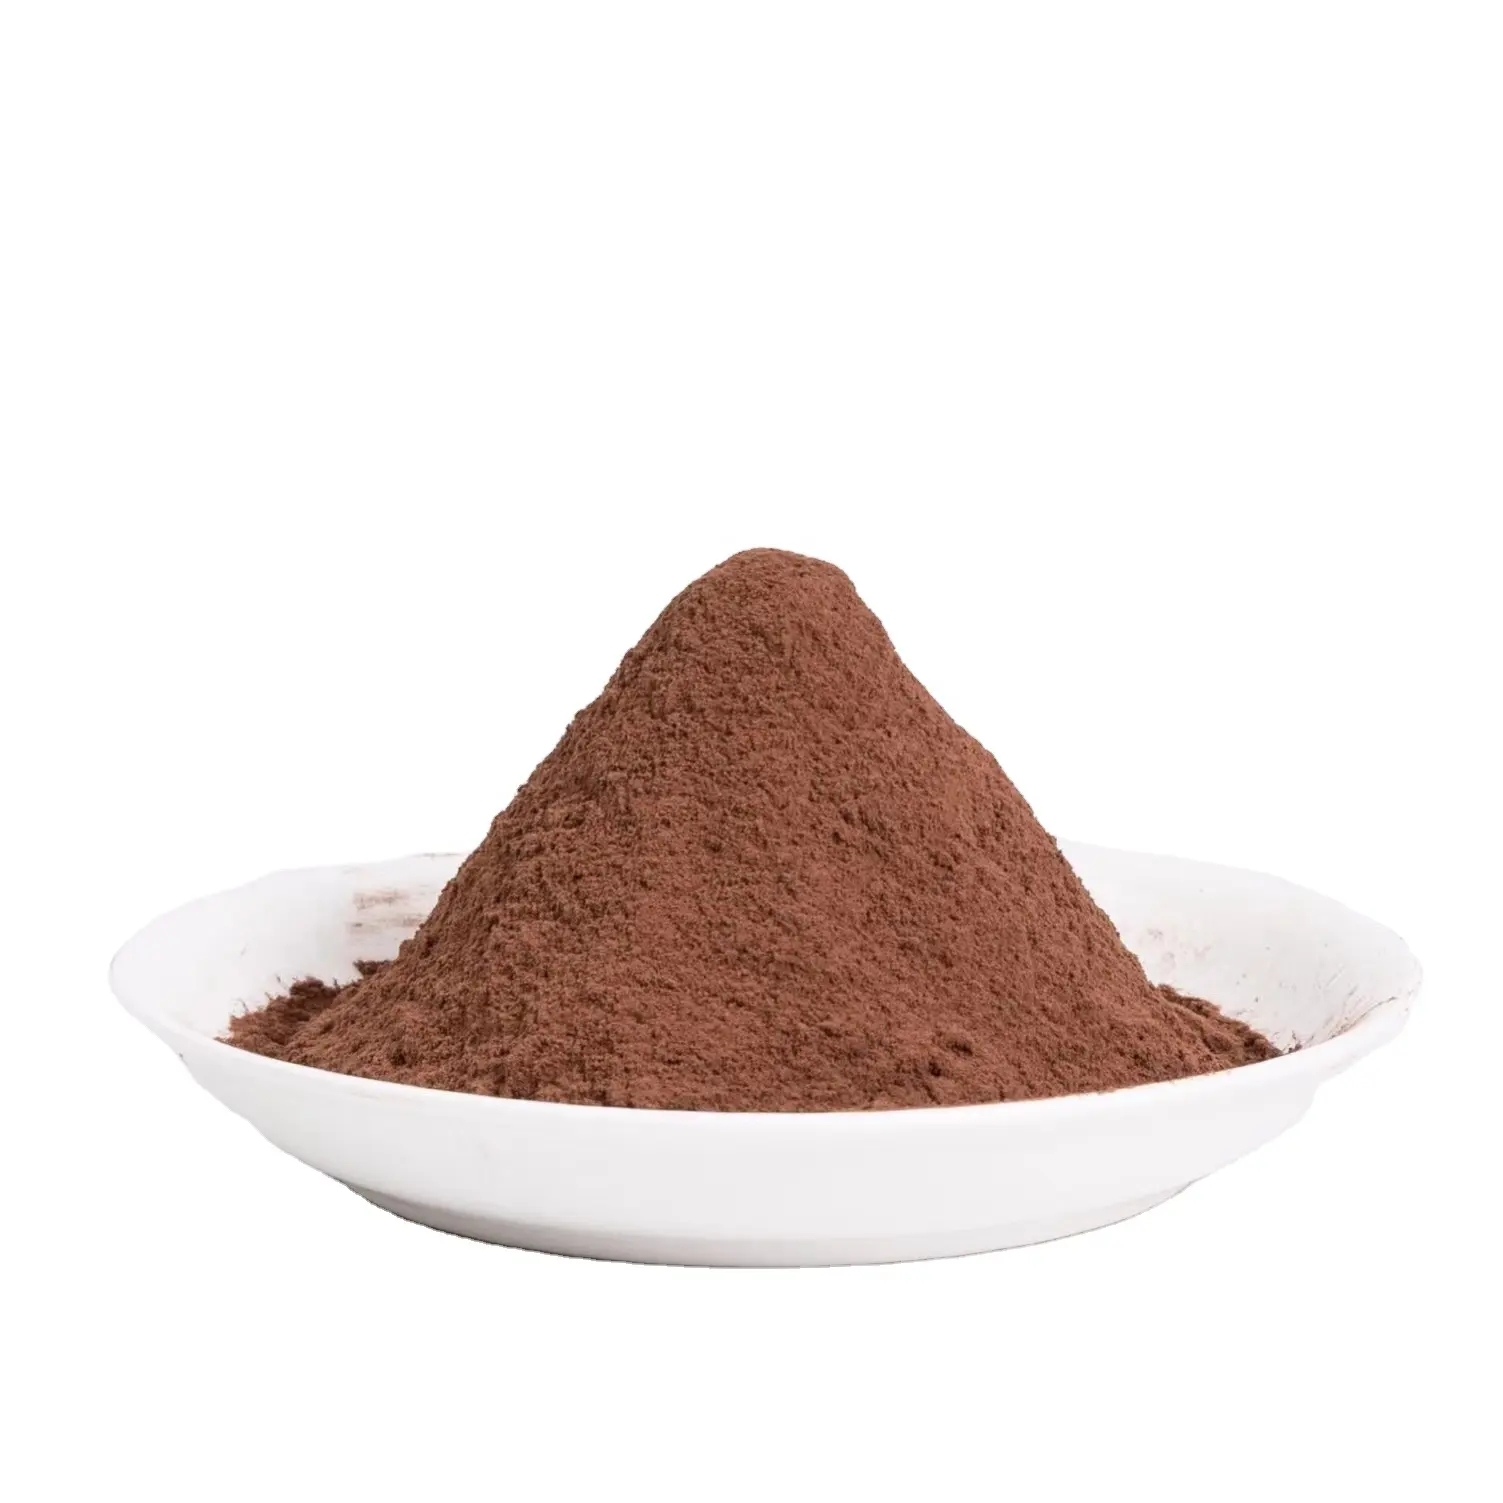 Best Price high quality Wholesales 25kg Alkalized reddish cocoa powder JR0303 made from West Africa cocoa beans